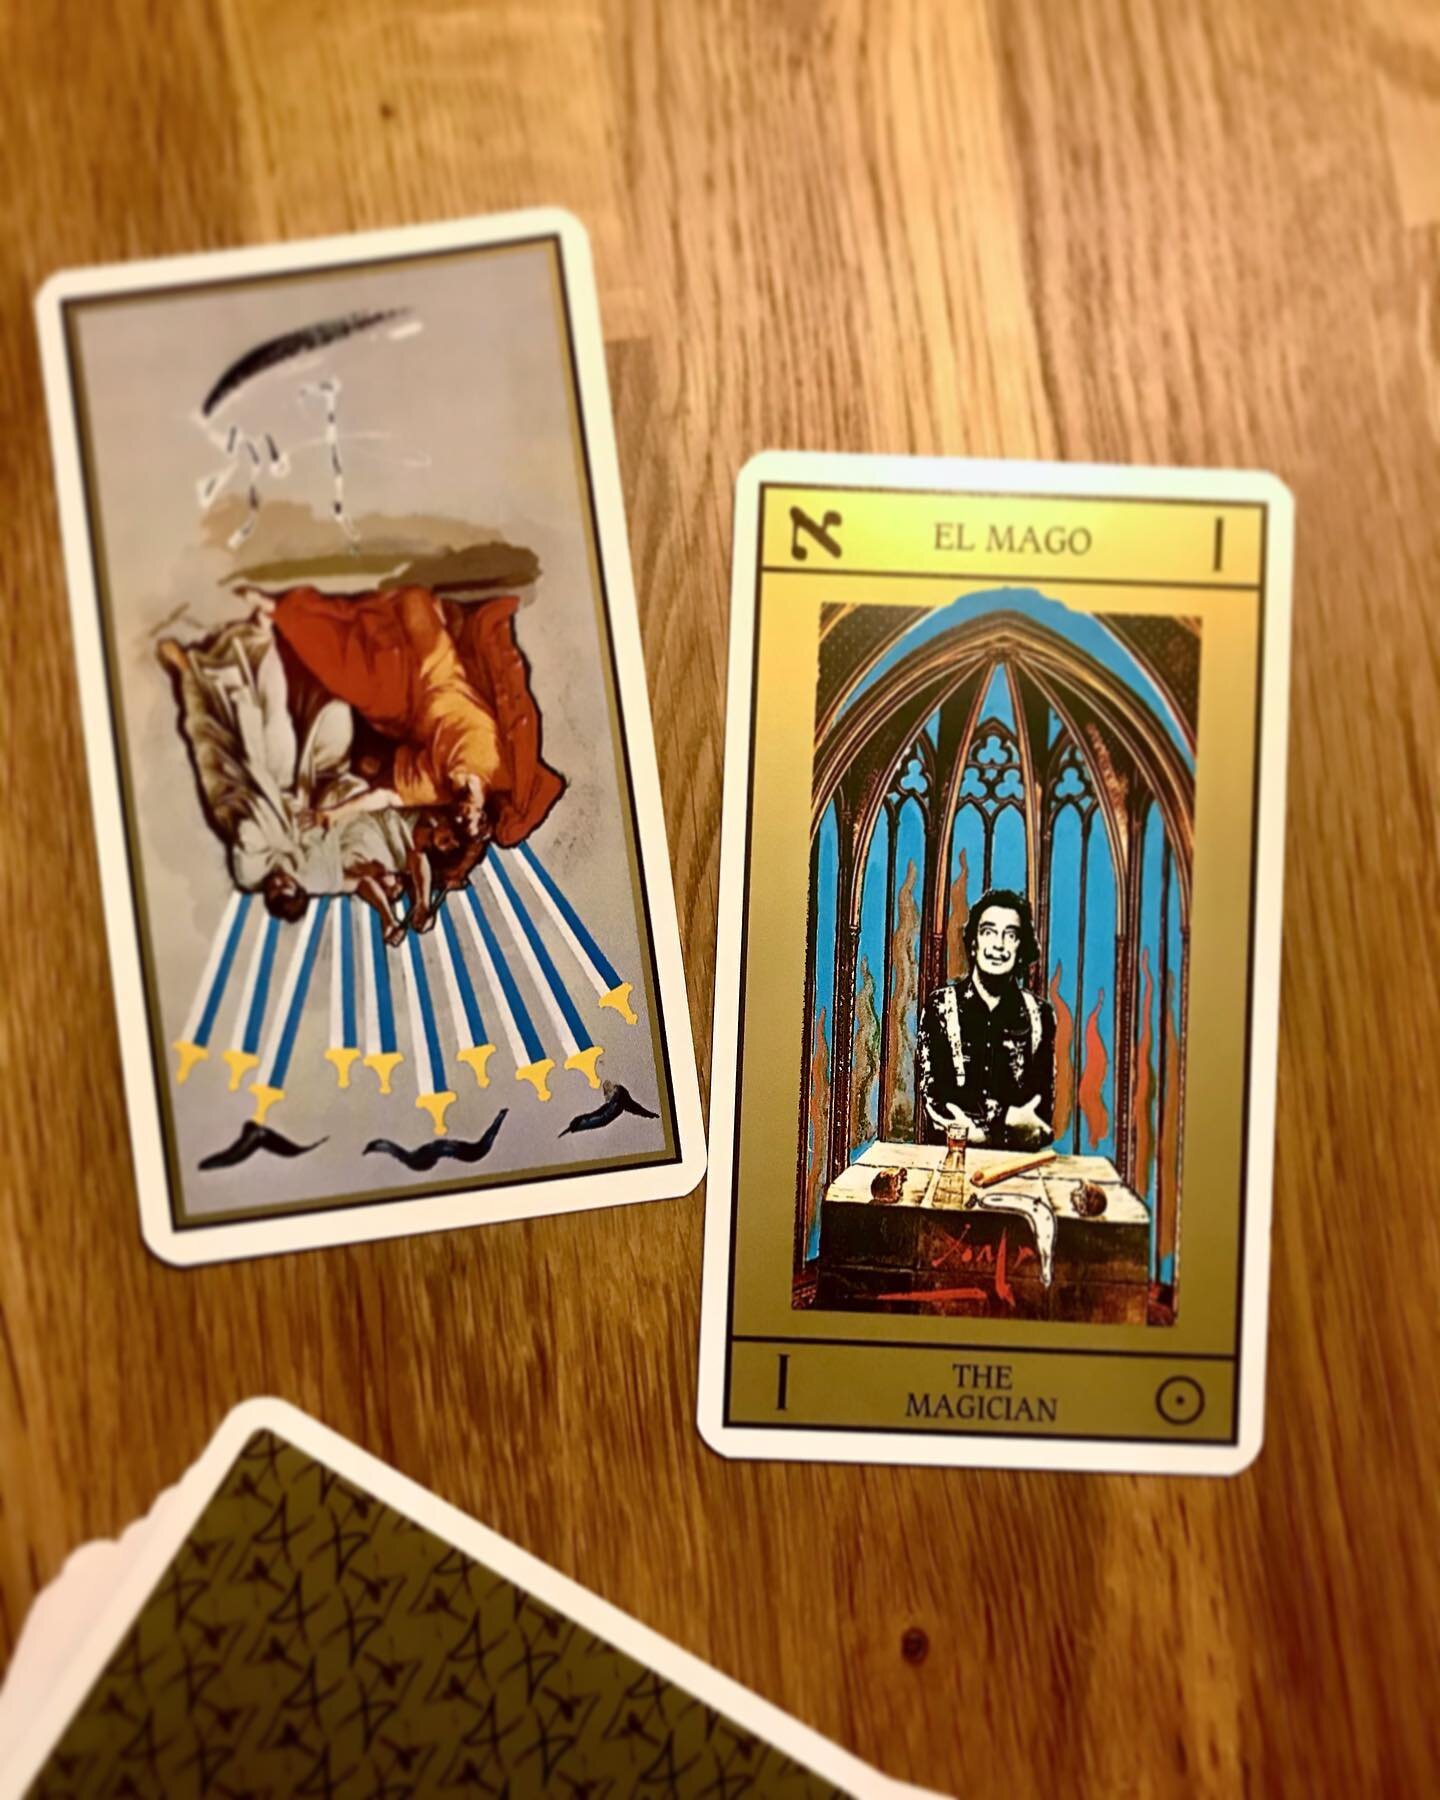 ✨Message for Week Ahead✨

&ldquo;Magic is the possibility of the impossible&rdquo;

Your mind is the most powerful asset you have. It can create amazing and unique things, but it can also destroy them. 
Believe in yourself and don&rsquo;t be afraid t